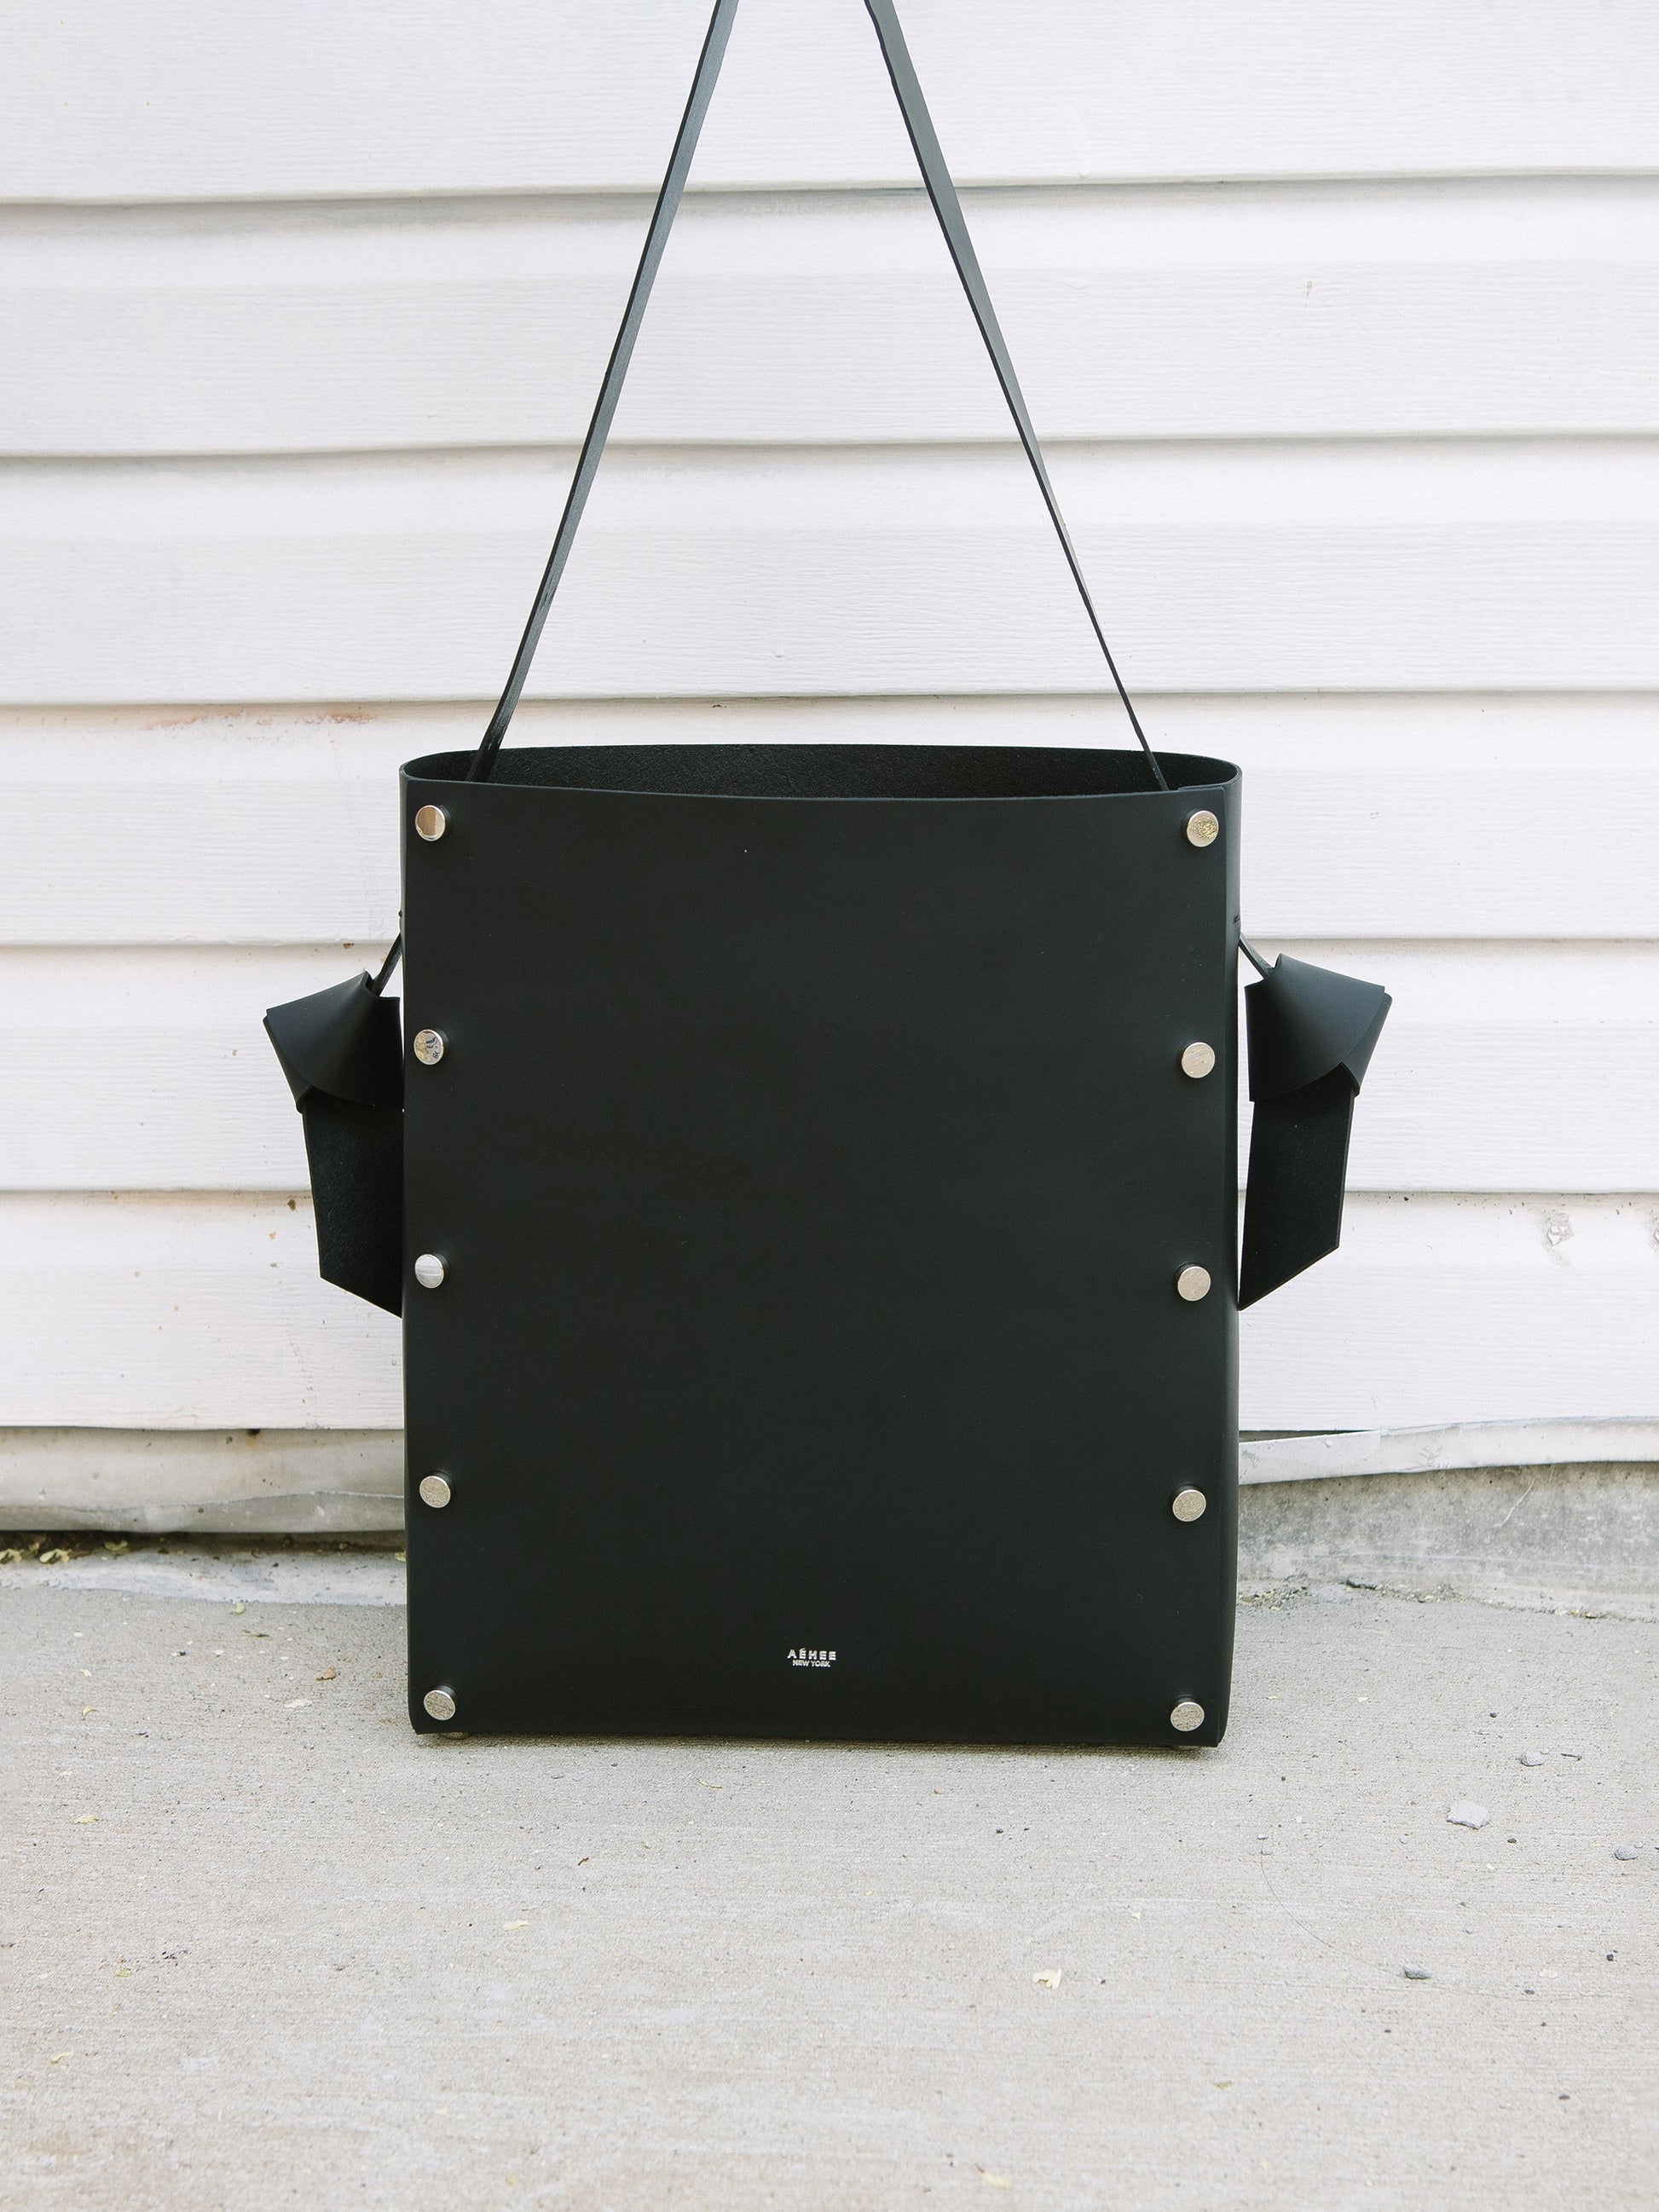 Chic black tote and bucket bag crafted from Italian vegetable tanned leather for a minimal yet sophisticated look.